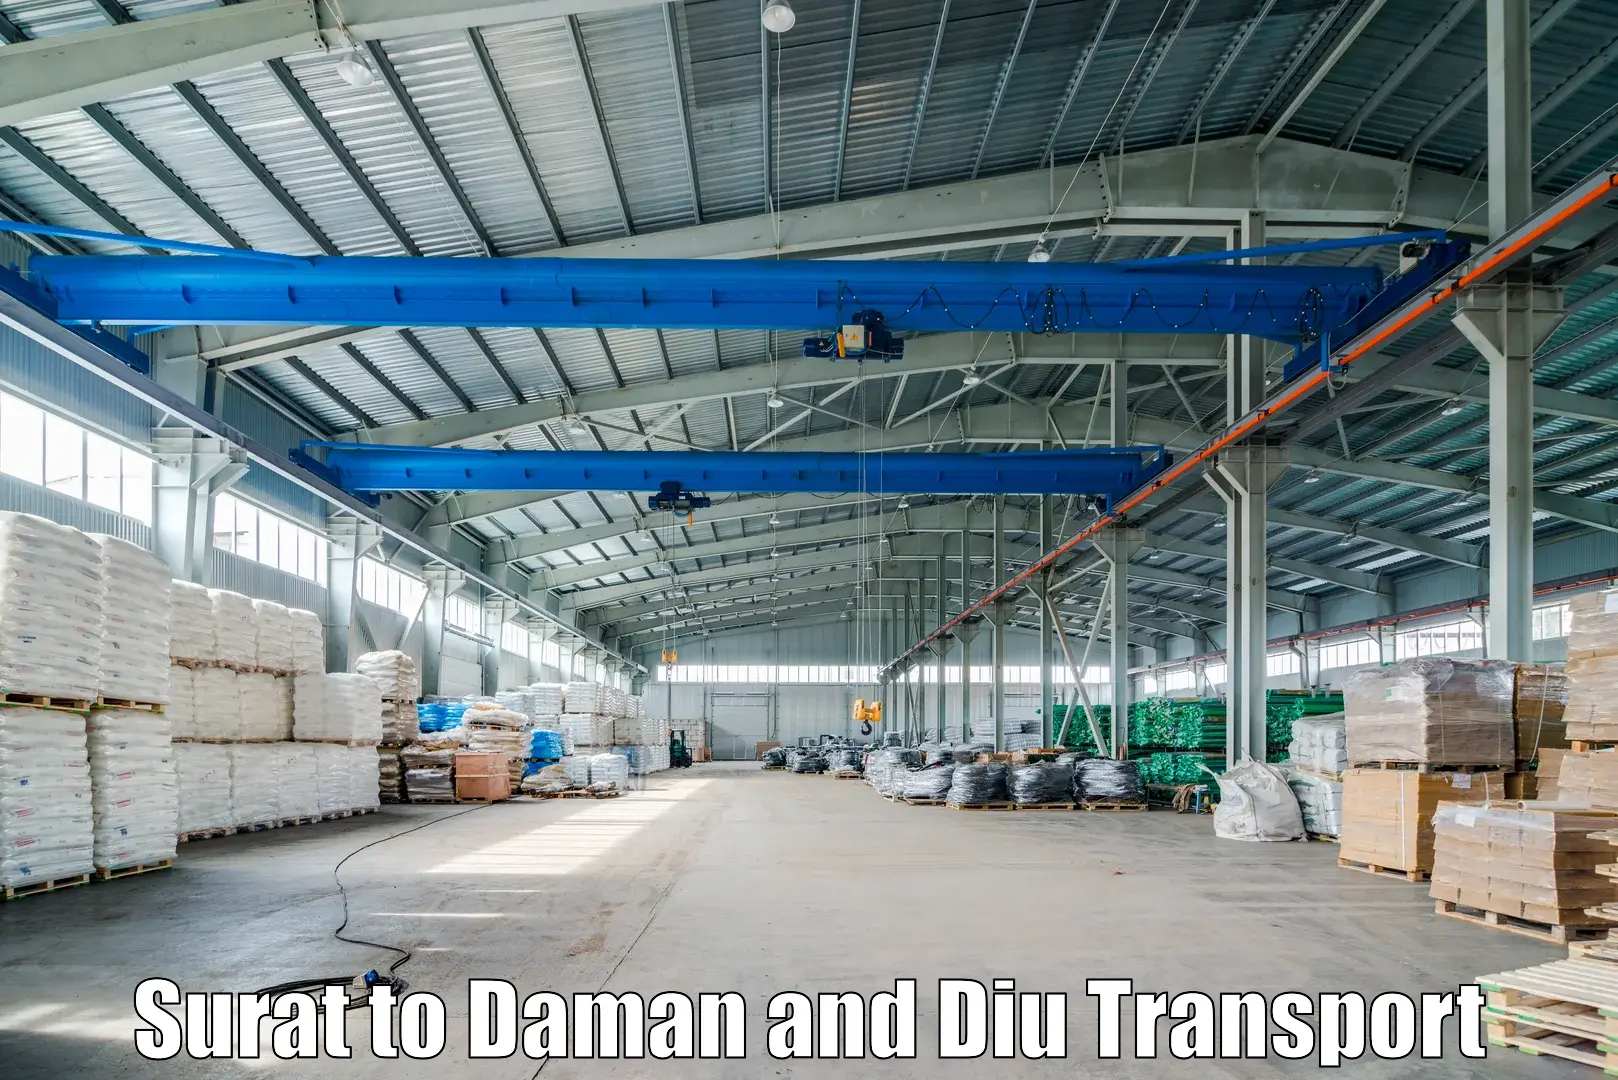 Nearby transport service Surat to Daman and Diu